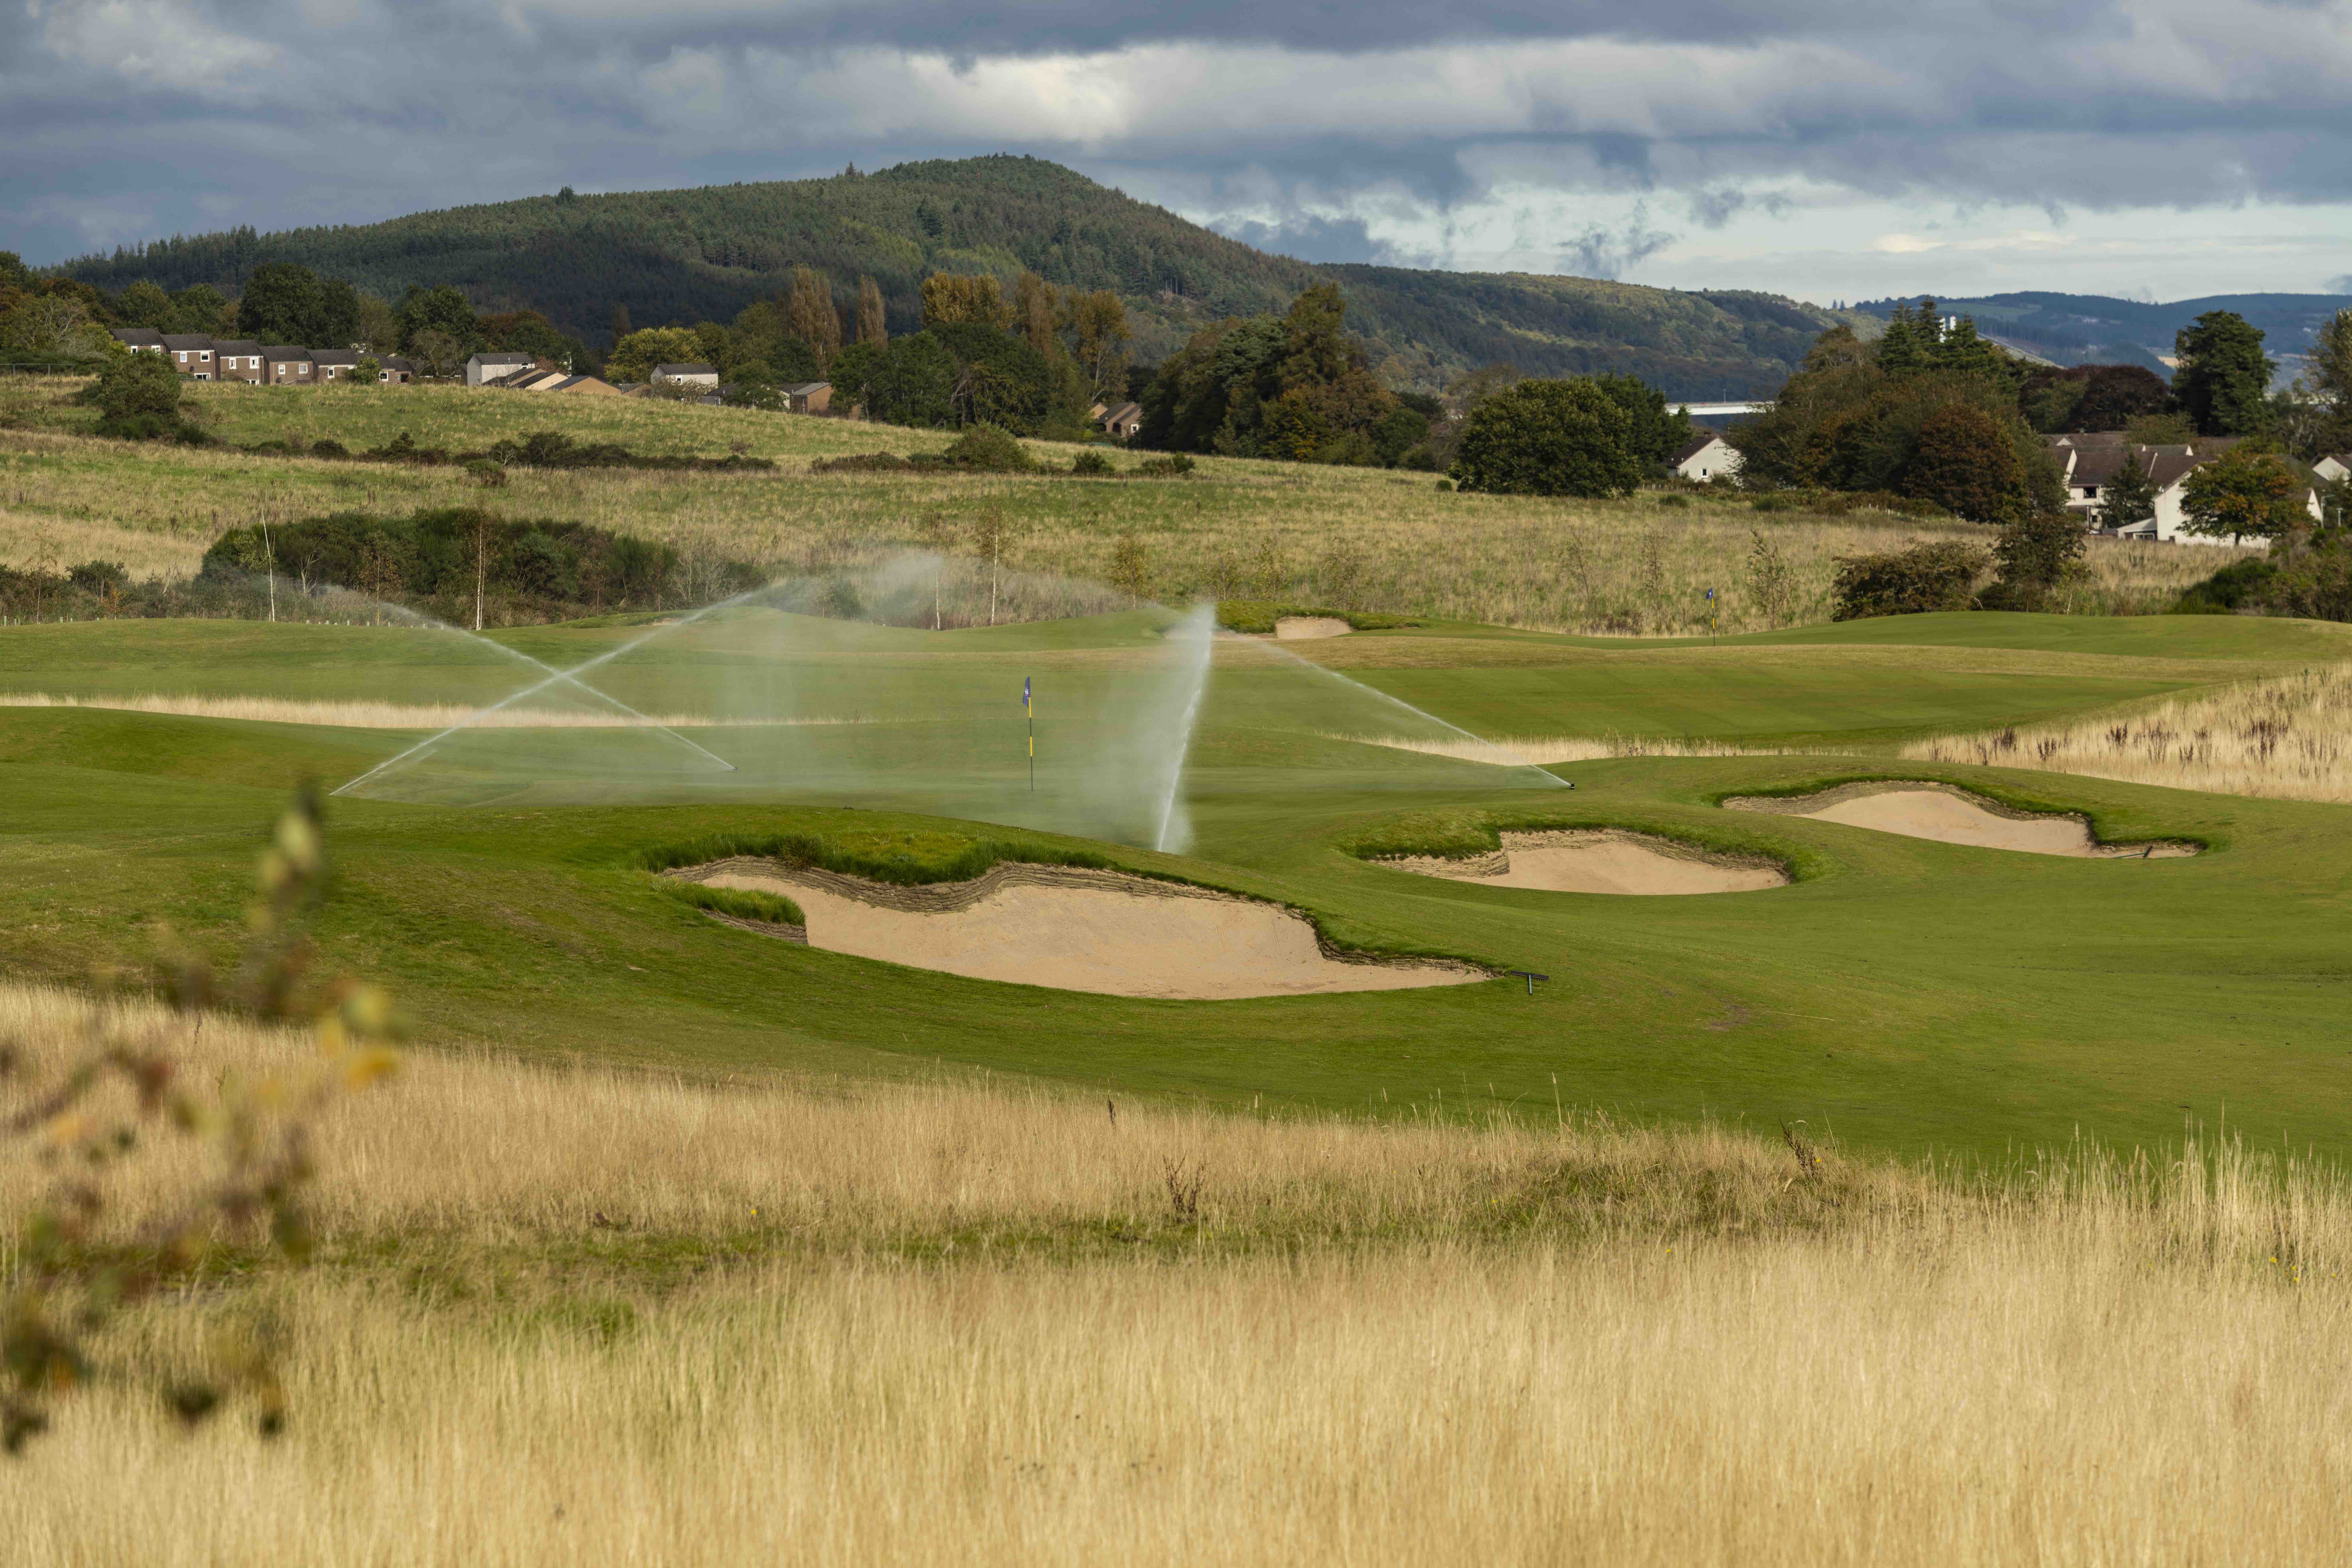 New Course, And Irrigation System, Fit For Kings